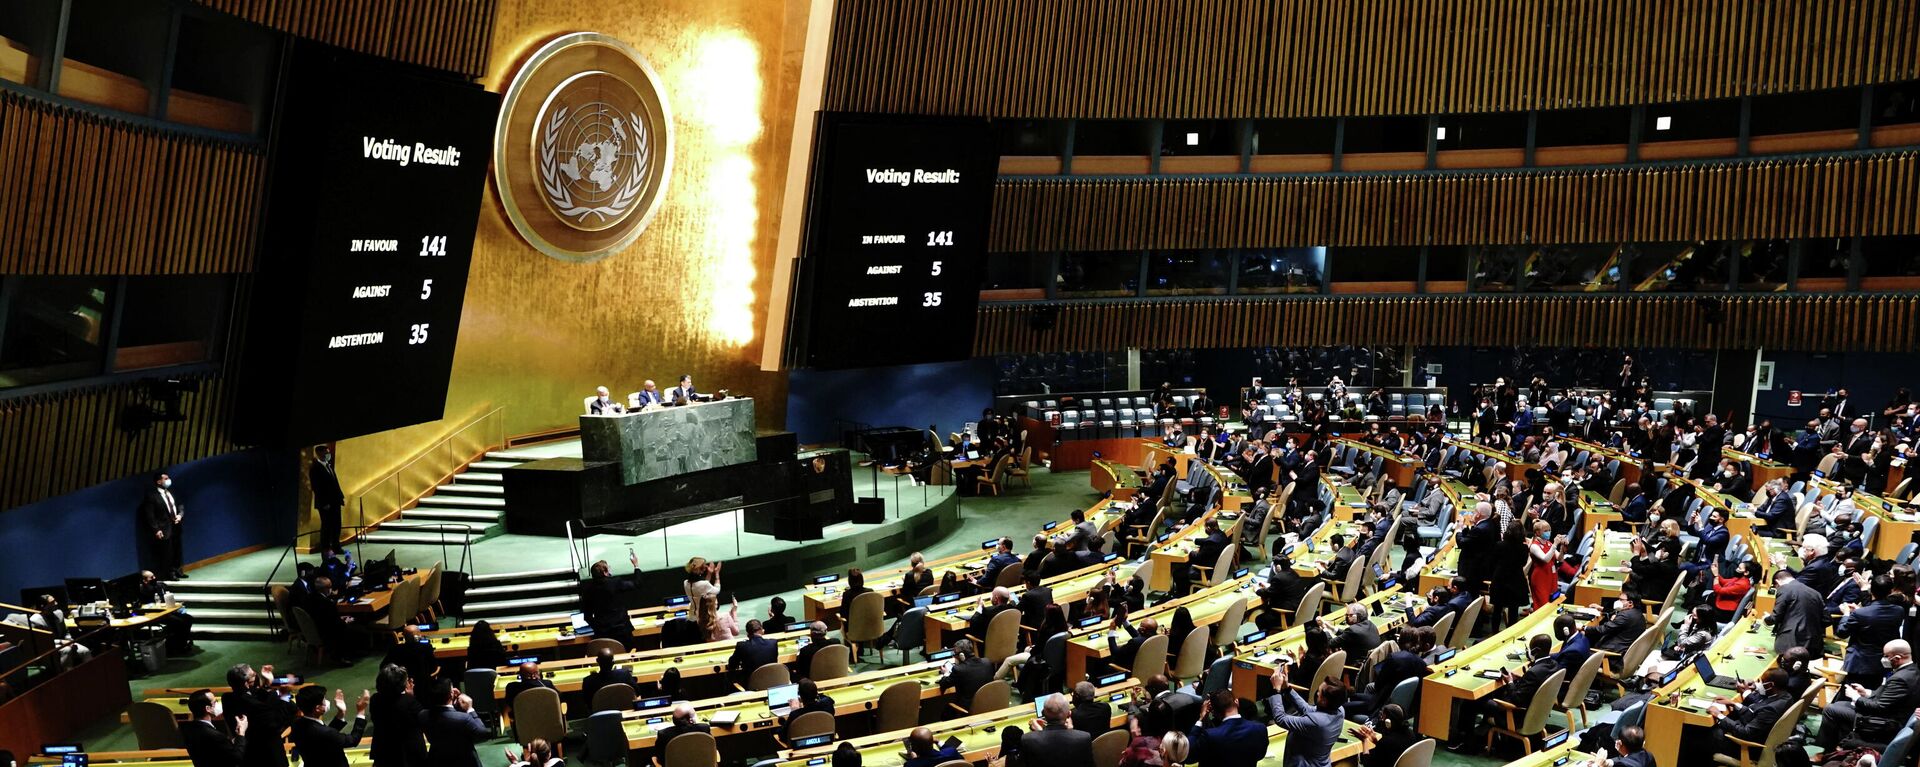 Delegates react as results of the voting are displayed during the 11th emergency special session of the 193-member U.N. General Assembly at the United Nations Headquarters in Manhattan, New York City, U.S., March 2, 2022 - Sputnik International, 1920, 08.04.2022